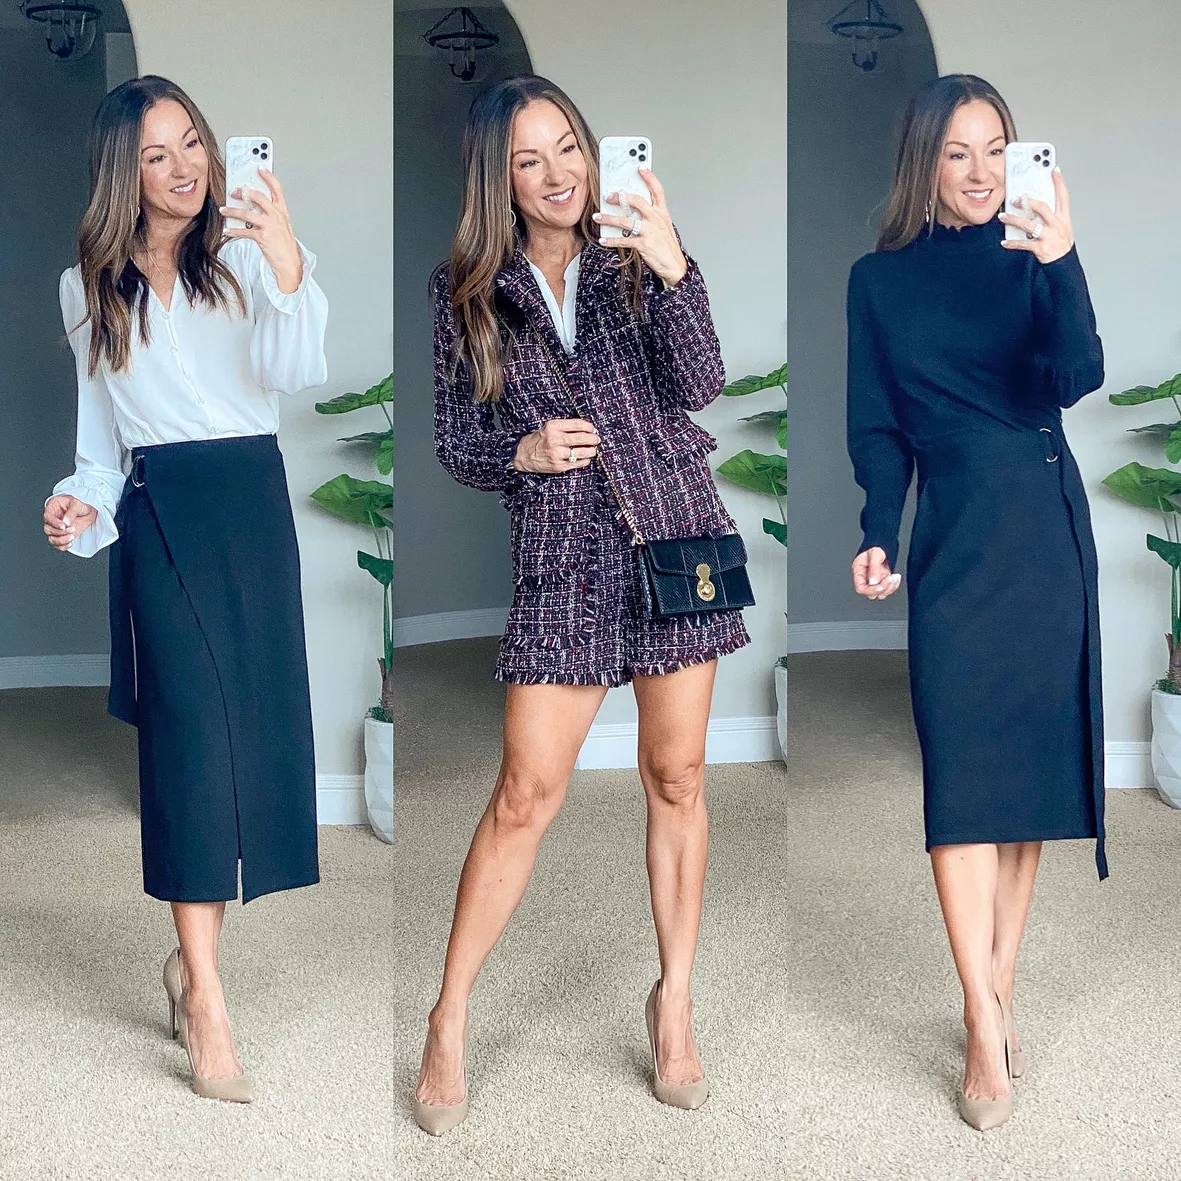 5 Sets I'm Currently Obsessed With - Olivia Jeanette  White pumps outfit,  Leather skirt outfit, Work fashion